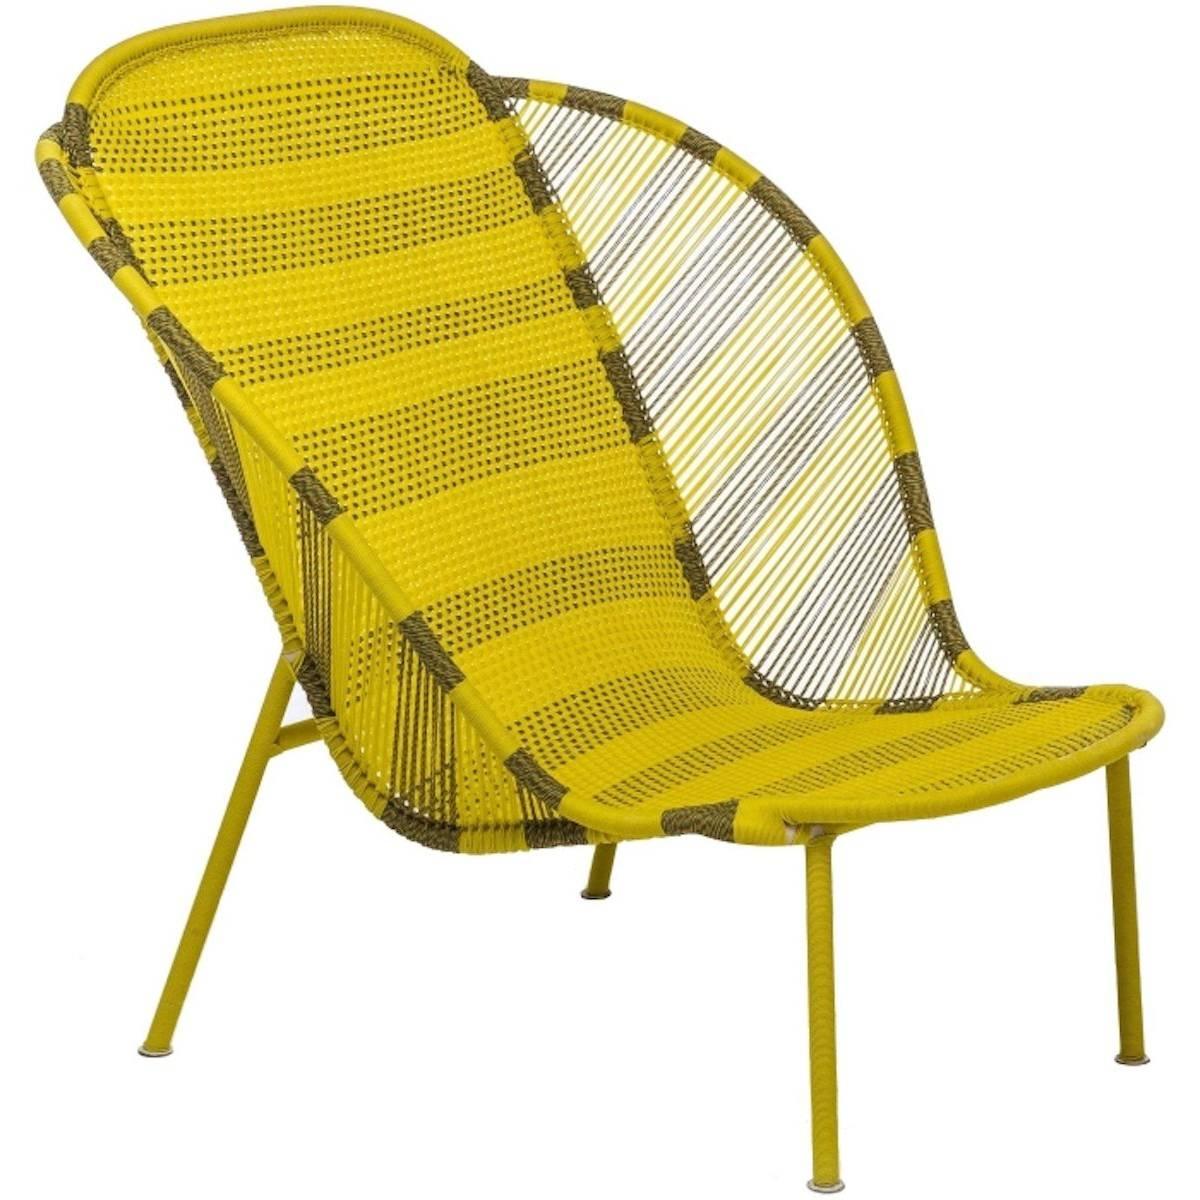 Imba Armchair for Indoor and Outdoor For Sale